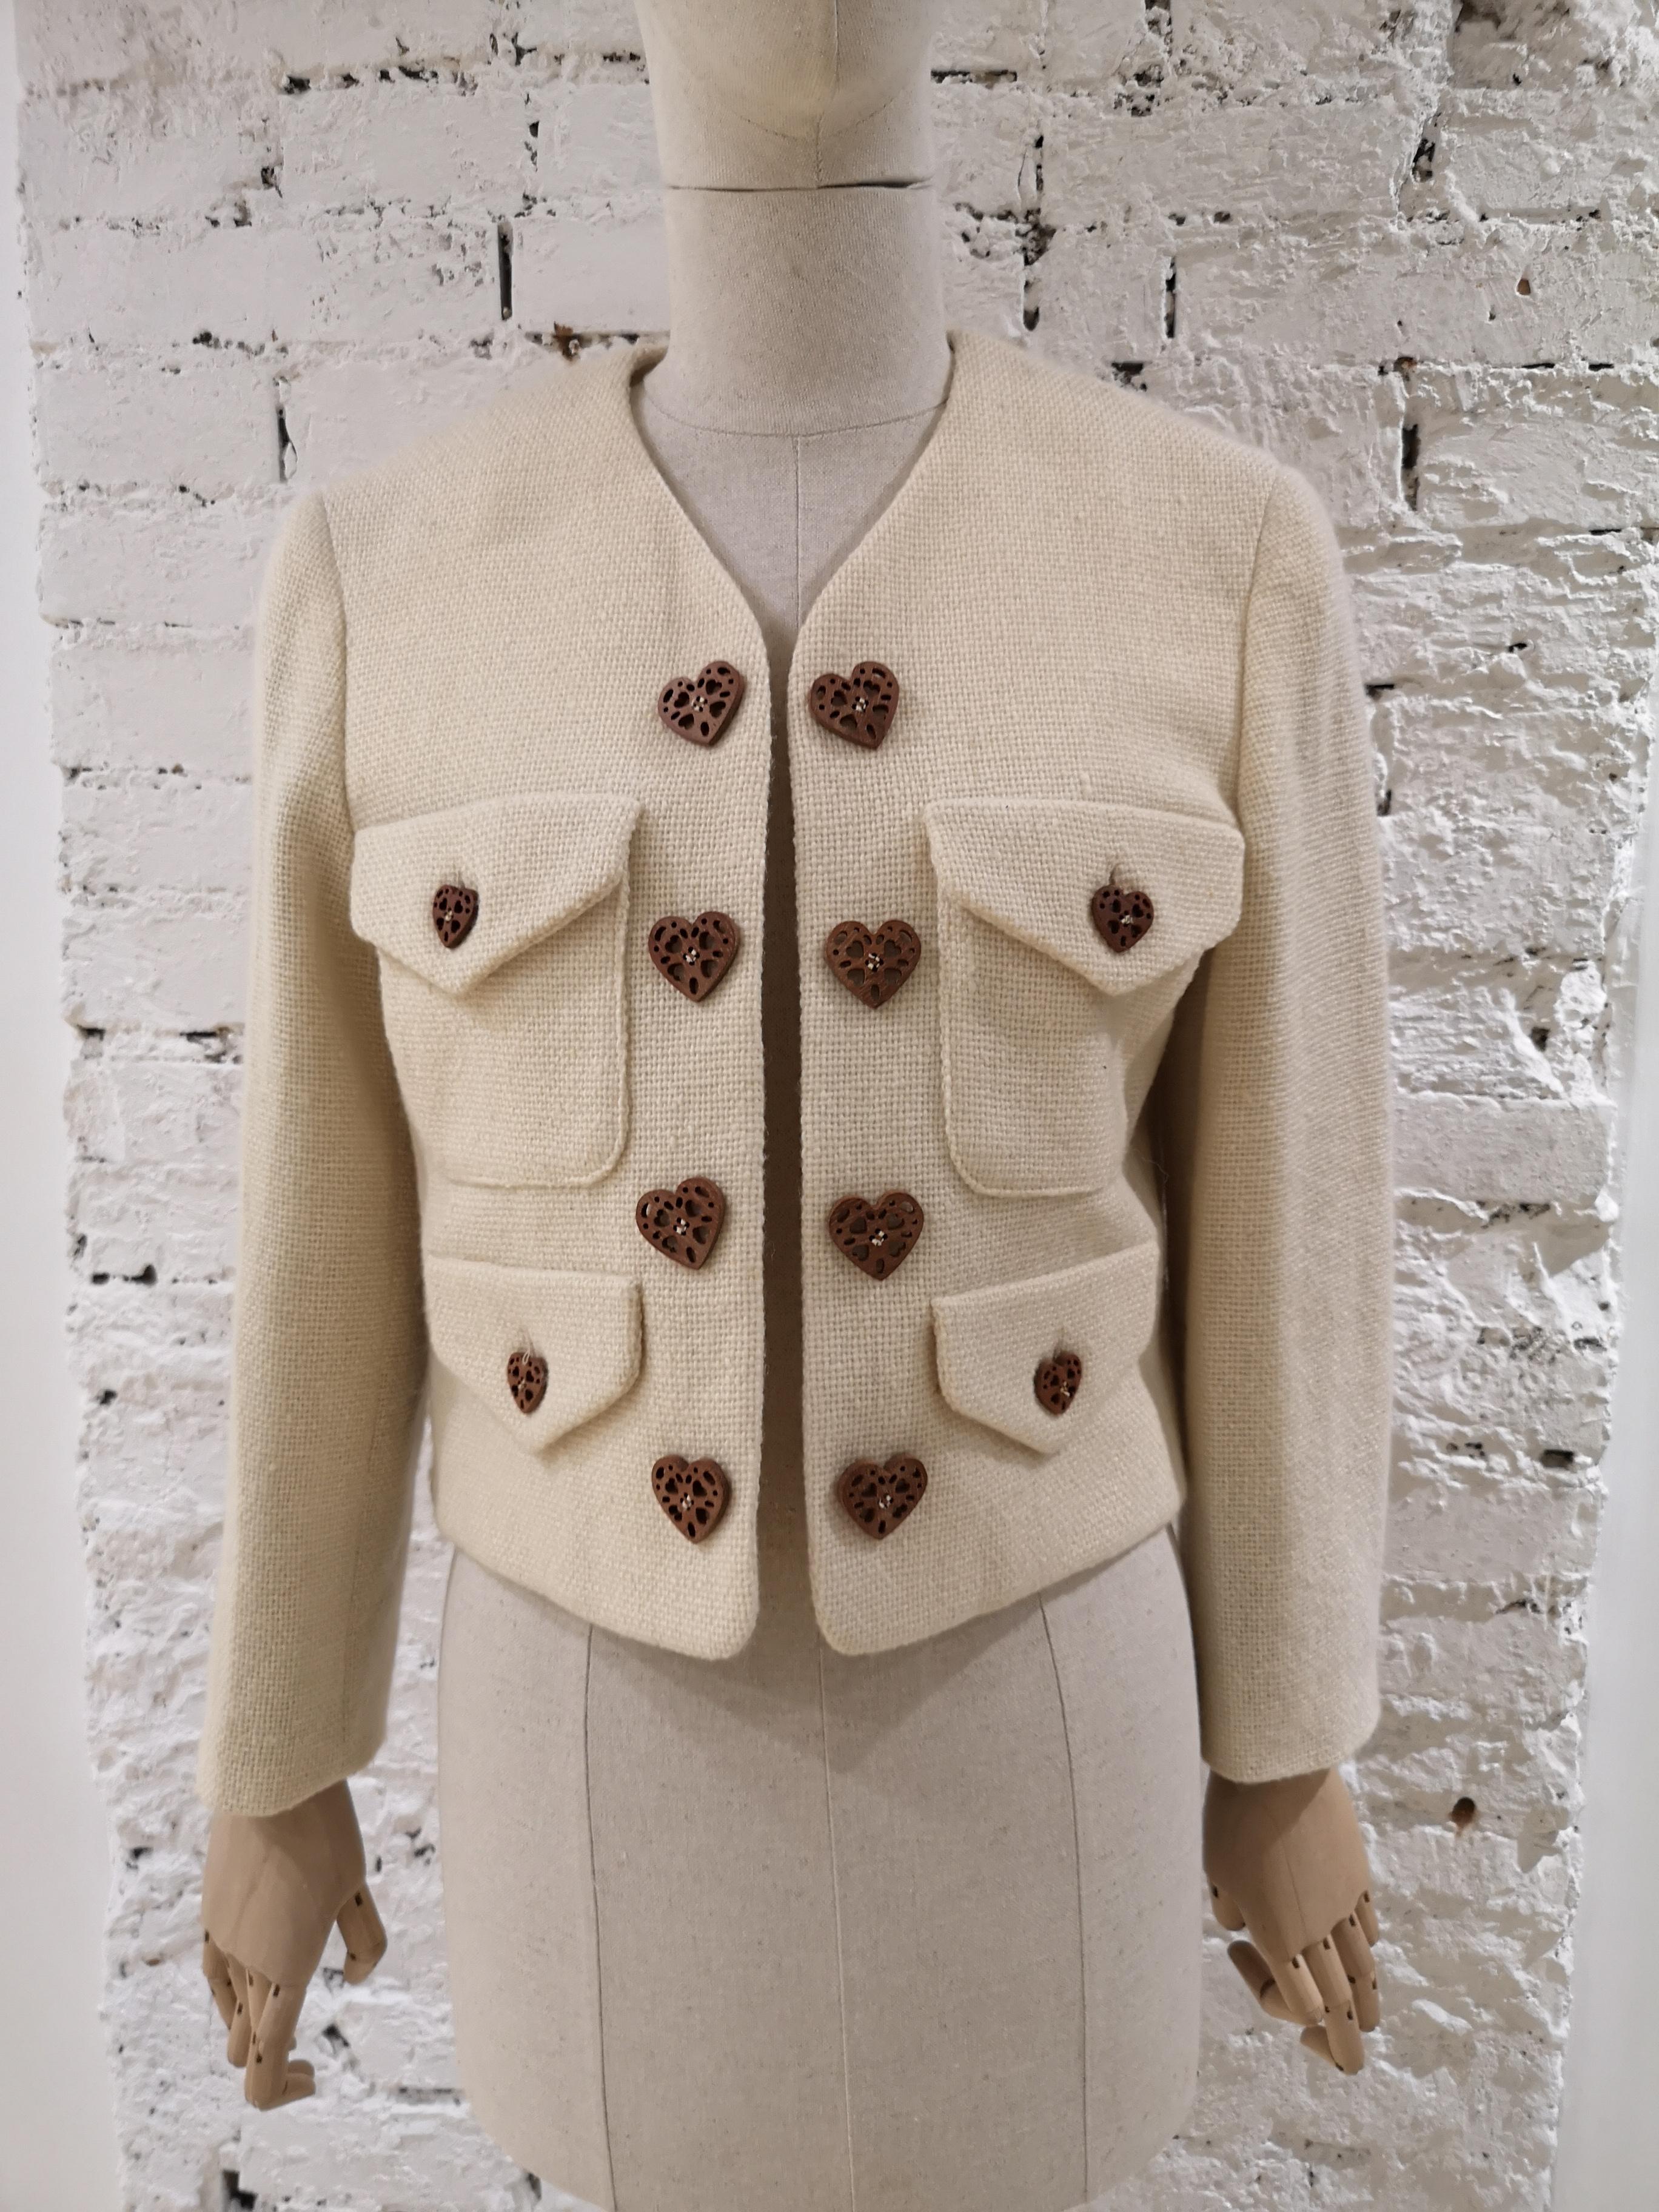 Moschino  Nature Friendly white Jacket
Totally made in italy embellished with brown hearts
open jacket
size 42